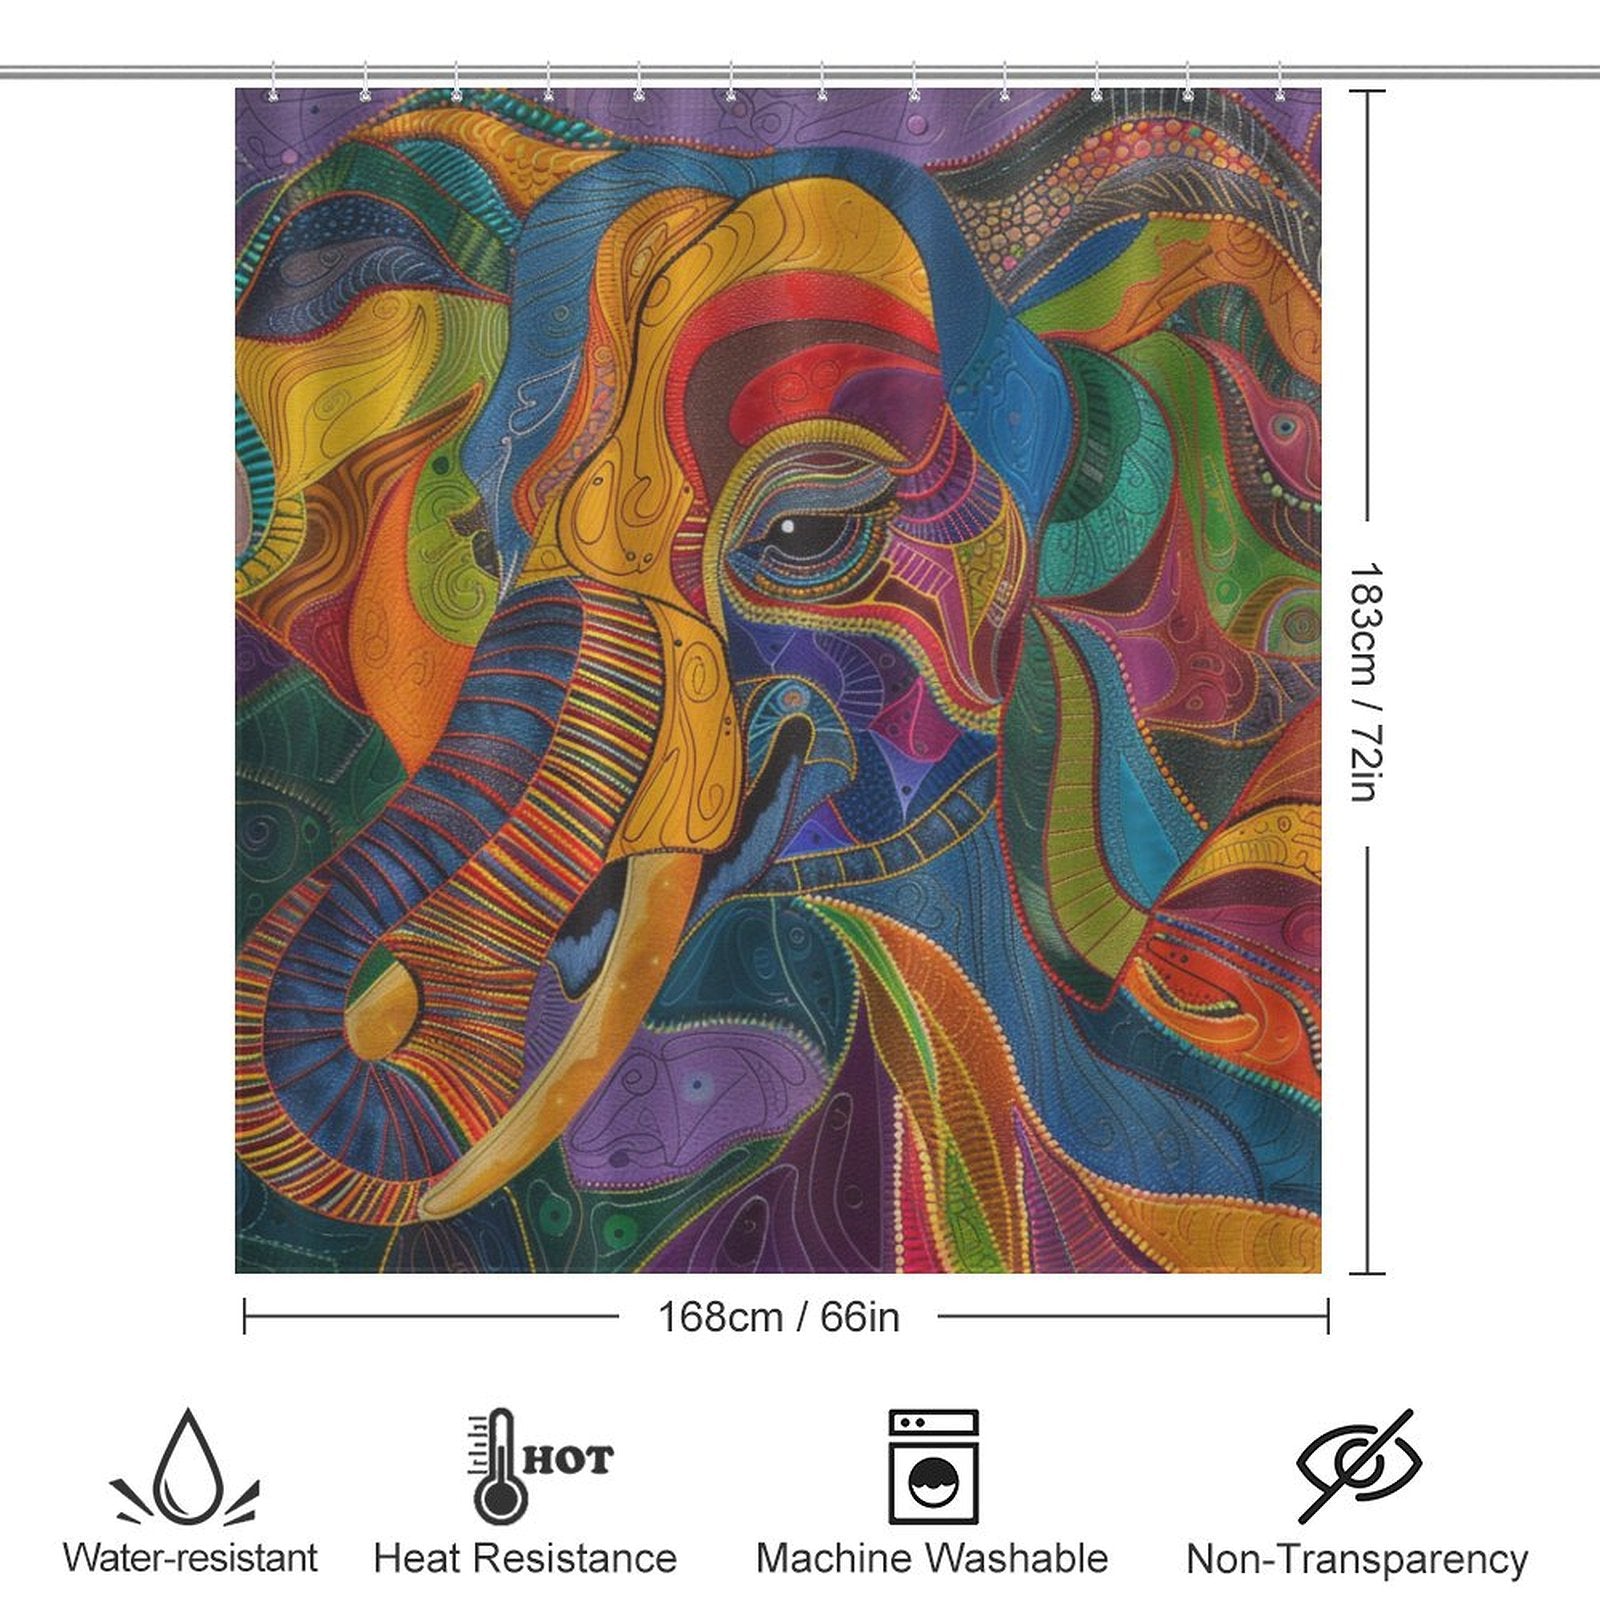 Introducing the Colorful Abstract Elephant Shower Curtain-Cottoncat by Cotton Cat, measuring 183cm x 168cm (72in x 66in). Showcasing vivid colors and an abstract design, this shower curtain features water-resistant, heat-resistant, machine-washable, and non-transparency properties with icons below the image.